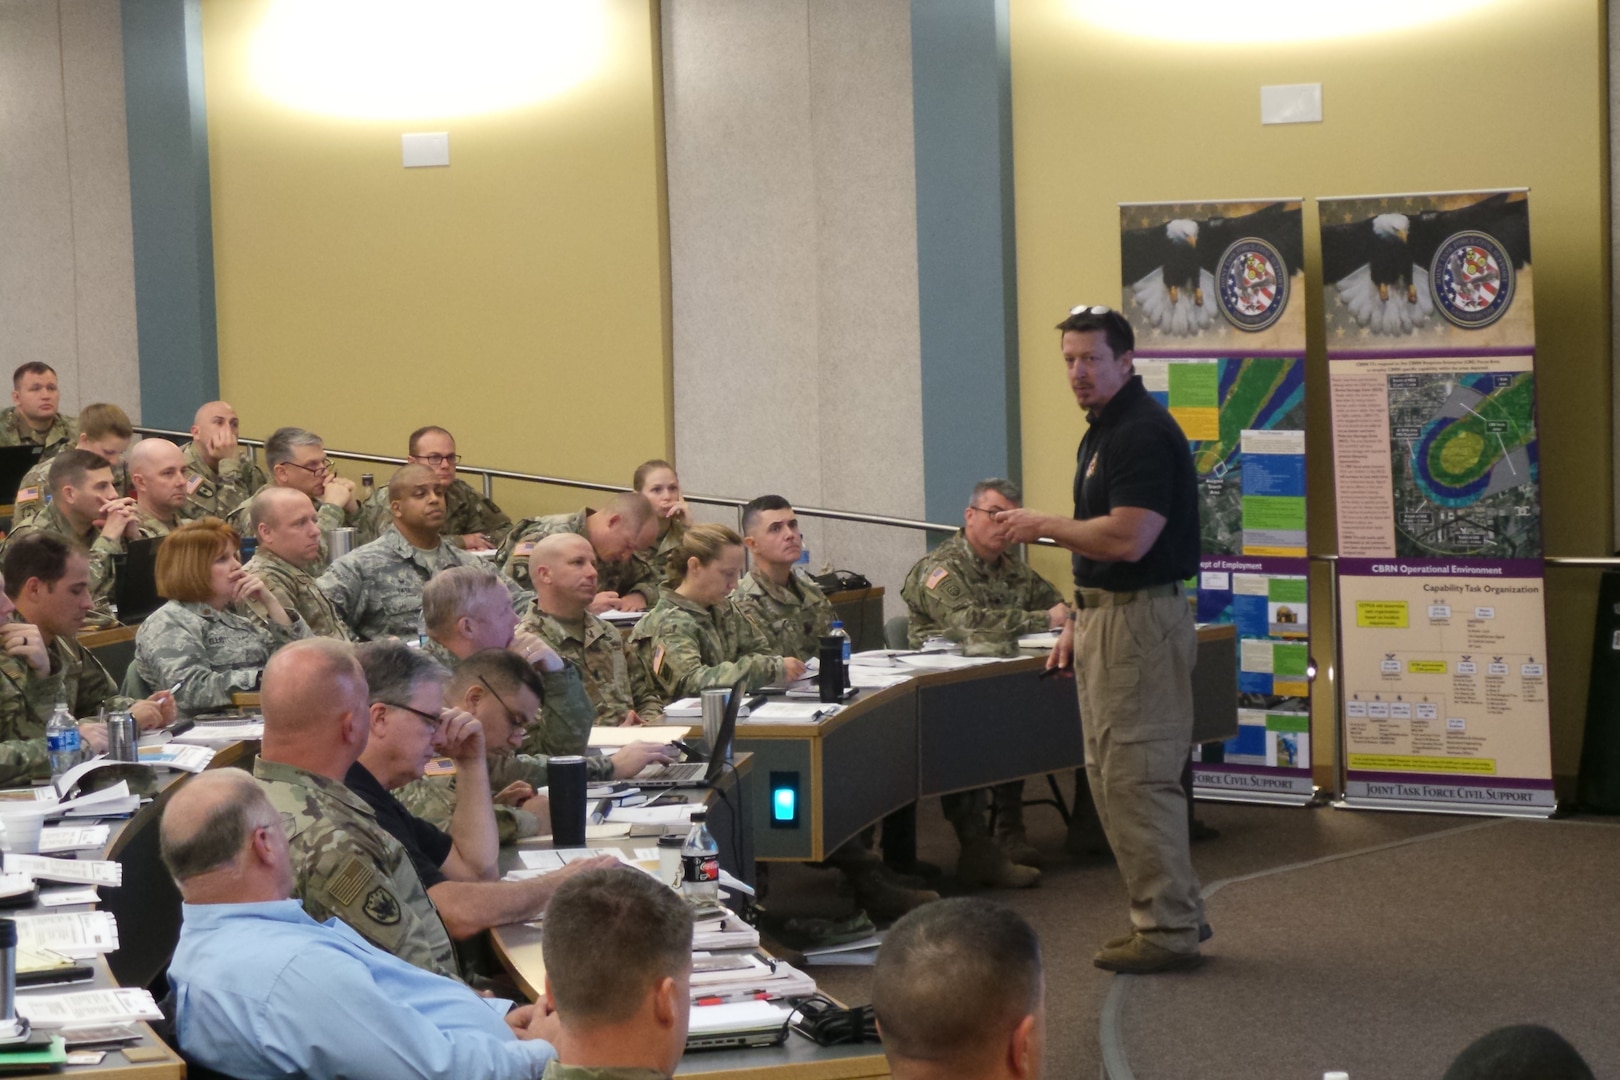 Joint Task Force Civil Support (JTF-CS) Deputy Director of Plans, Policy and Interagency Stan Bacon briefs leaders and members of the defense chemical, biological, radiological and nuclear (CBRN) response force (DCRF) and defense support to civil authorities (DSCA) during the mobile training team (MTT) held at Joint Base Lewis-McChord, Wash. The MTT focused on the CBRN mission and DSCA. The briefings are designed to train oncoming DCRF units on specific mission requirements in the event of a CBRN response. (Official DoD photo by Mass Communication Specialist 3rd Class Michael Redd/RELEASED)